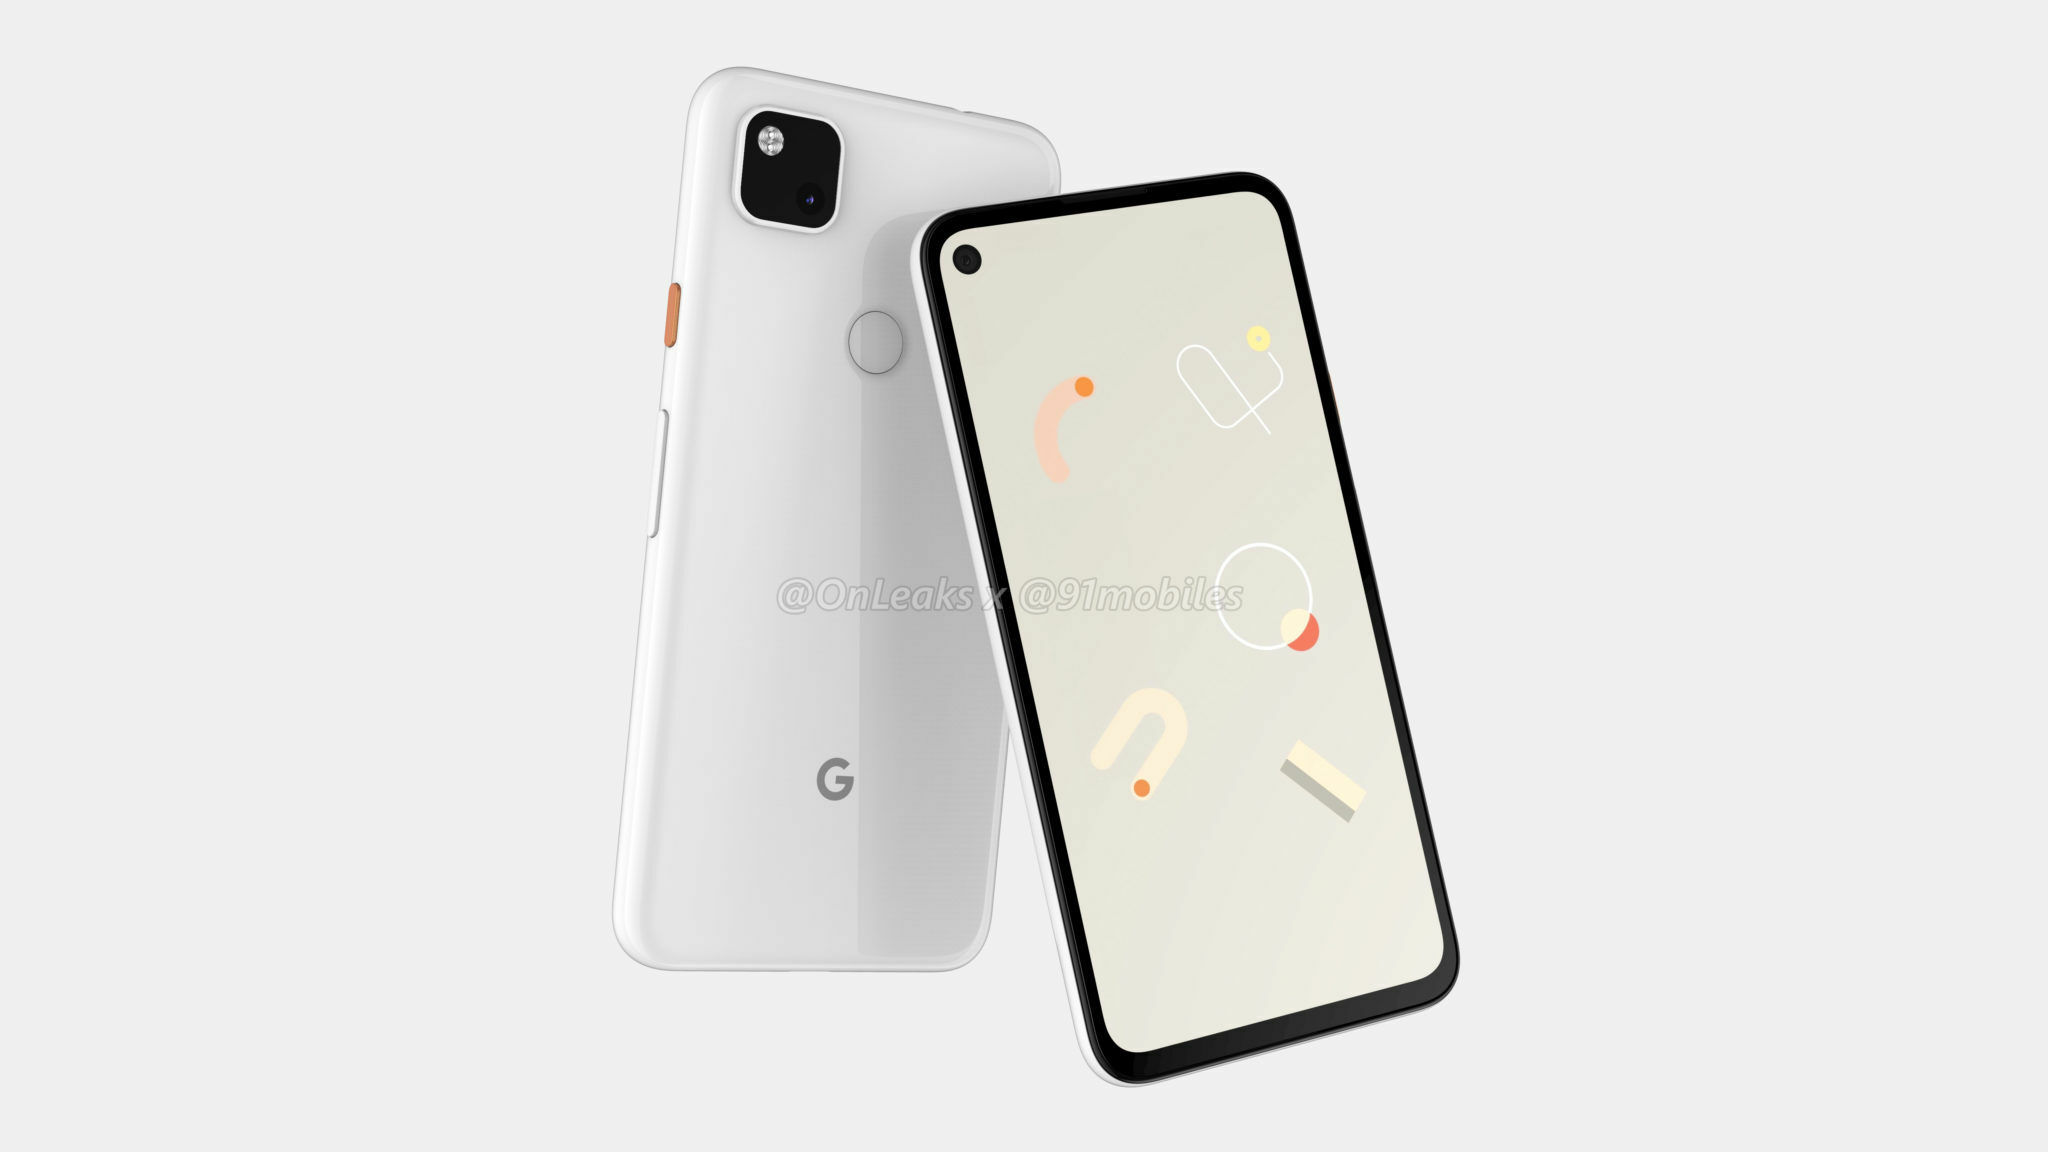 When will the Google Pixel 4a be out?